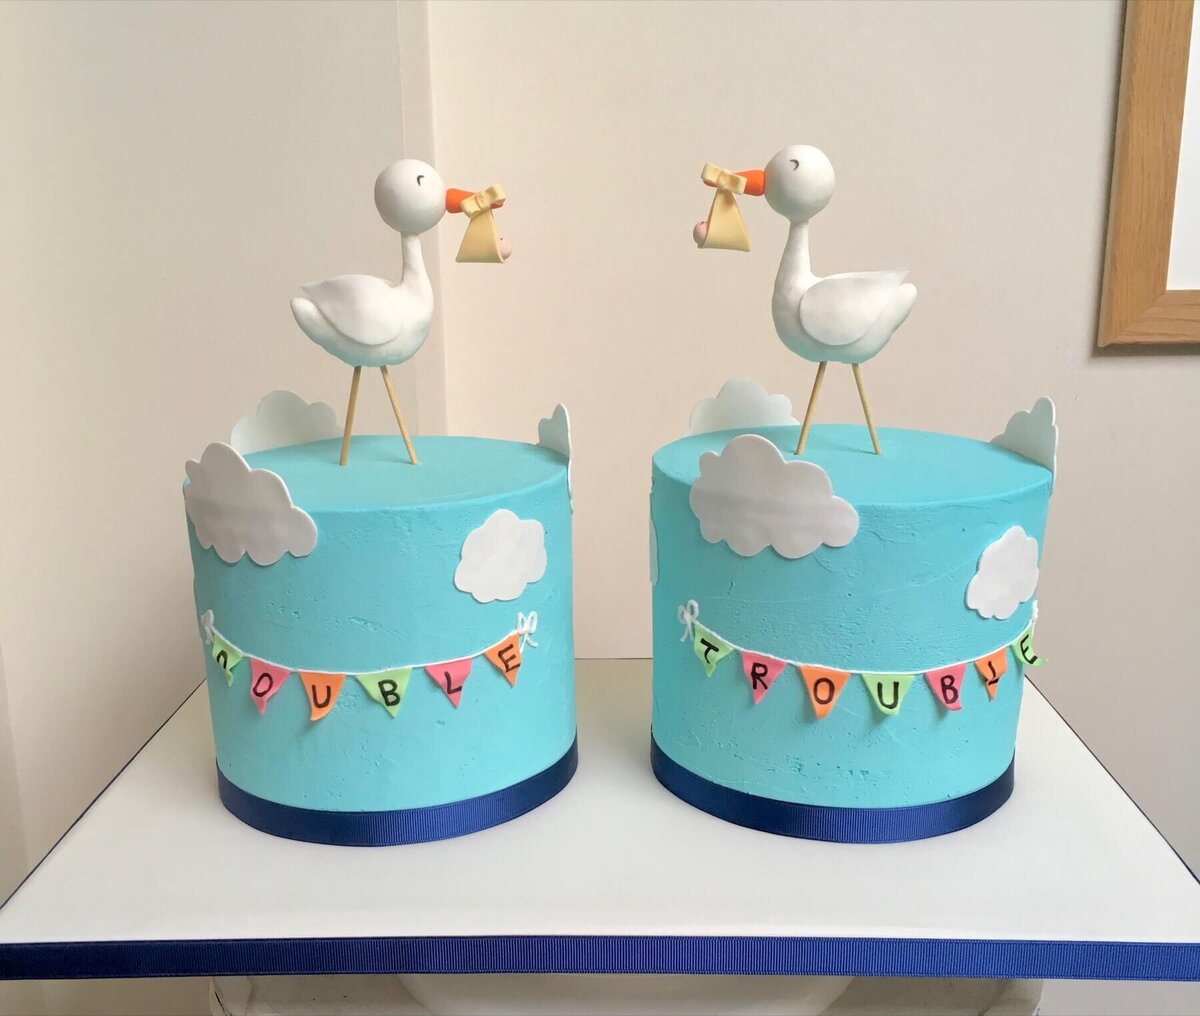 Two blue cakes that are almost identical with storks on top of each cake holding one baby each and buntin on the cakes, one saying "double" and the other saying "trouble"